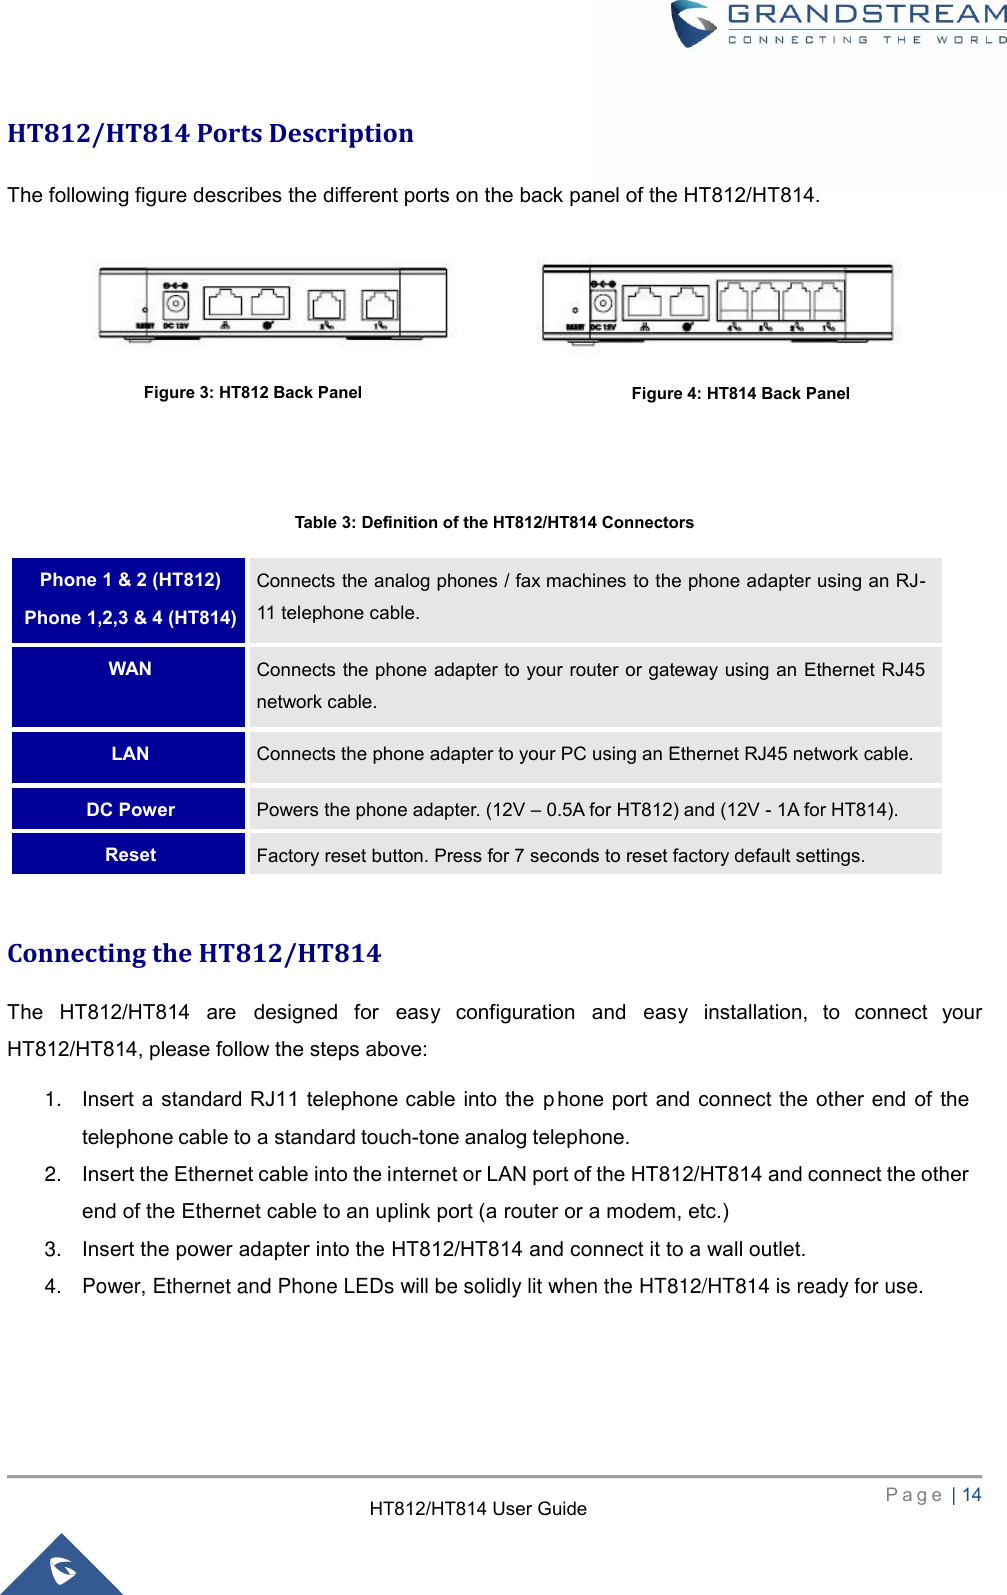     P a g e  | 14        HT812/HT814 User Guide  HT812/HT814 Ports Description The following figure describes the different ports on the back panel of the HT812/HT814.        Table 3: Definition of the HT812/HT814 Connectors  Connecting the HT812/HT814 The  HT812/HT814  are  designed  for  easy  configuration  and  easy  installation,  to  connect  your HT812/HT814, please follow the steps above:   1. Insert a standard RJ11 telephone cable  into the  phone  port  and connect the other end  of the telephone cable to a standard touch-tone analog telephone. 2. Insert the Ethernet cable into the internet or LAN port of the HT812/HT814 and connect the other end of the Ethernet cable to an uplink port (a router or a modem, etc.) 3. Insert the power adapter into the HT812/HT814 and connect it to a wall outlet. 4.  Power, Ethernet and Phone LEDs will be solidly lit when the HT812/HT814 is ready for use. Phone 1 &amp; 2 (HT812) Phone 1,2,3 &amp; 4 (HT814)  Connects the analog phones / fax machines to the phone adapter using an RJ-11 telephone cable. WAN Connects the phone adapter to your router or gateway using an Ethernet RJ45 network cable. co LAN Connects the phone adapter to your PC using an Ethernet RJ45 network cable. DC Power Powers the phone adapter. (12V – 0.5A for HT812) and (12V - 1A for HT814).  Reset Factory reset button. Press for 7 seconds to reset factory default settings. Figure 3: HT812 Back Panel Figure 4: HT814 Back Panel 